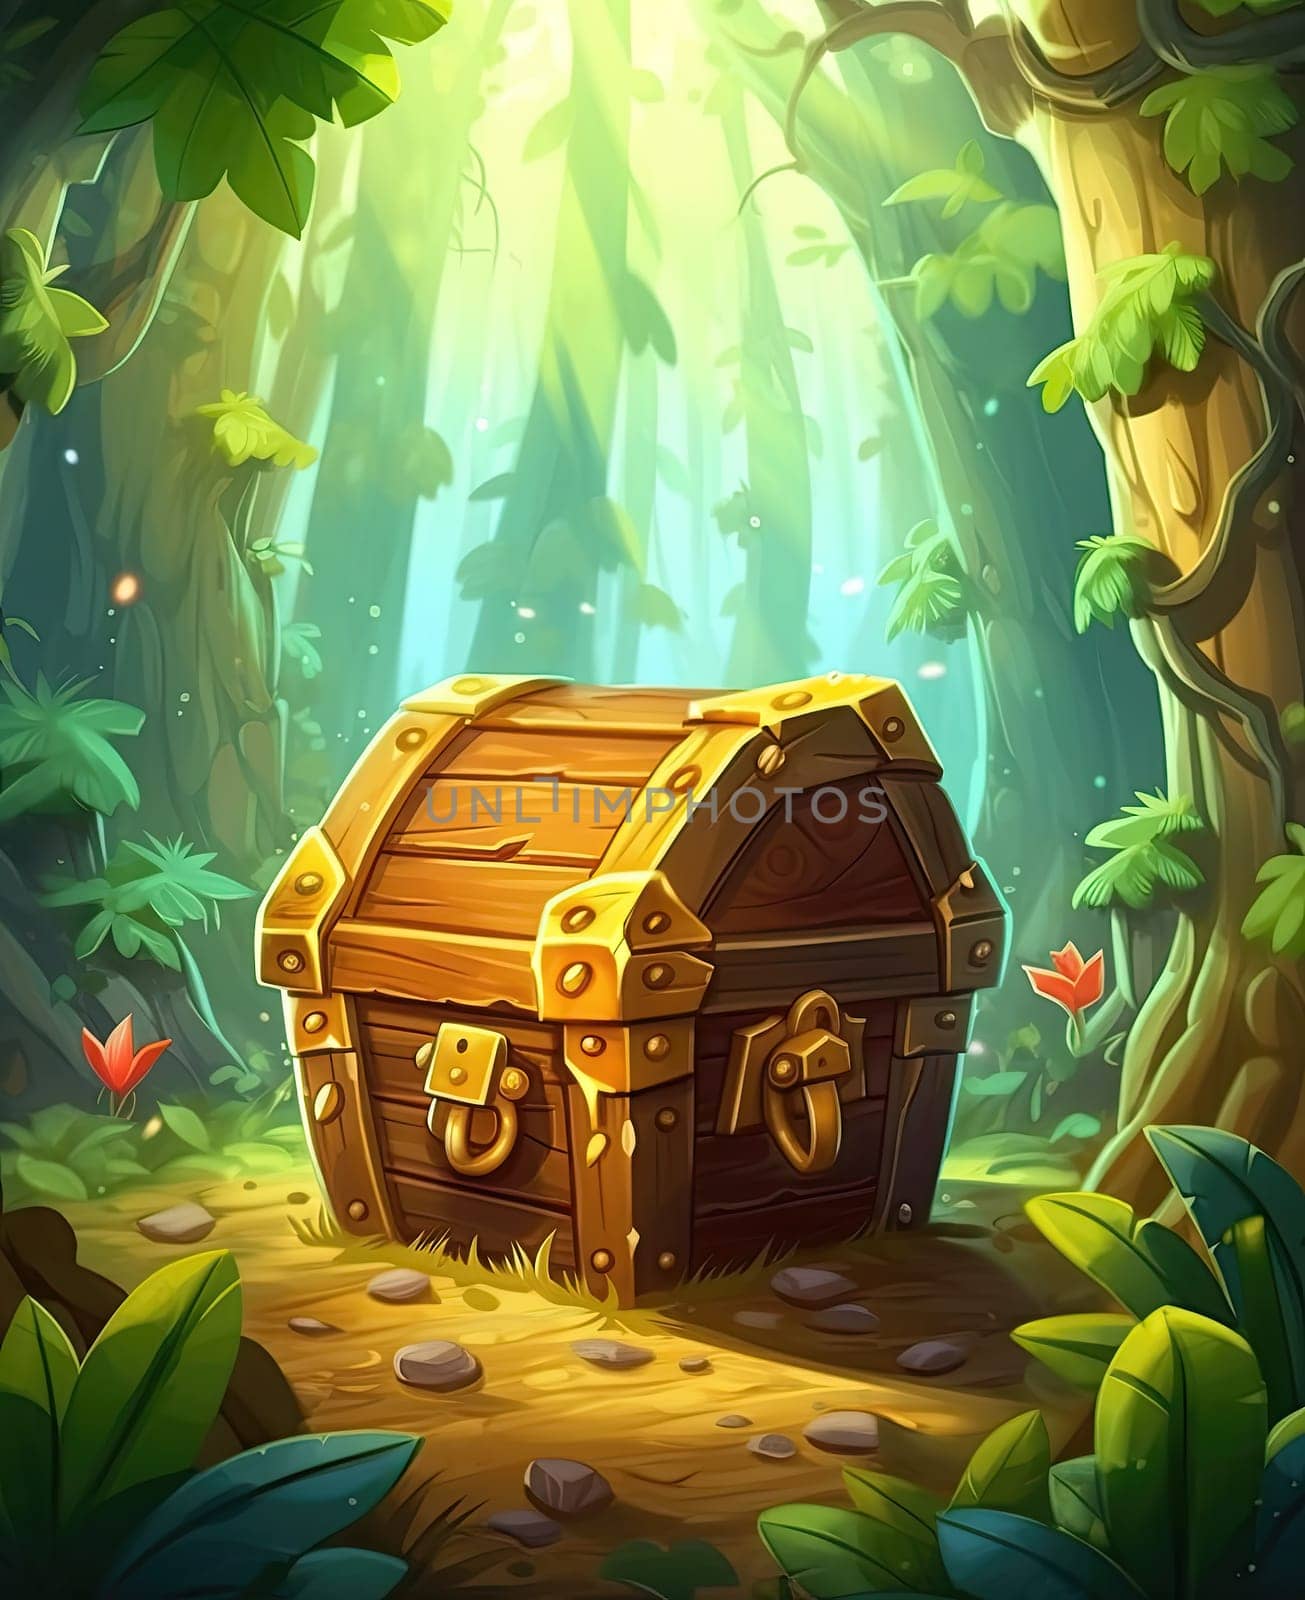 Illustration of a wooden chest in the forest.